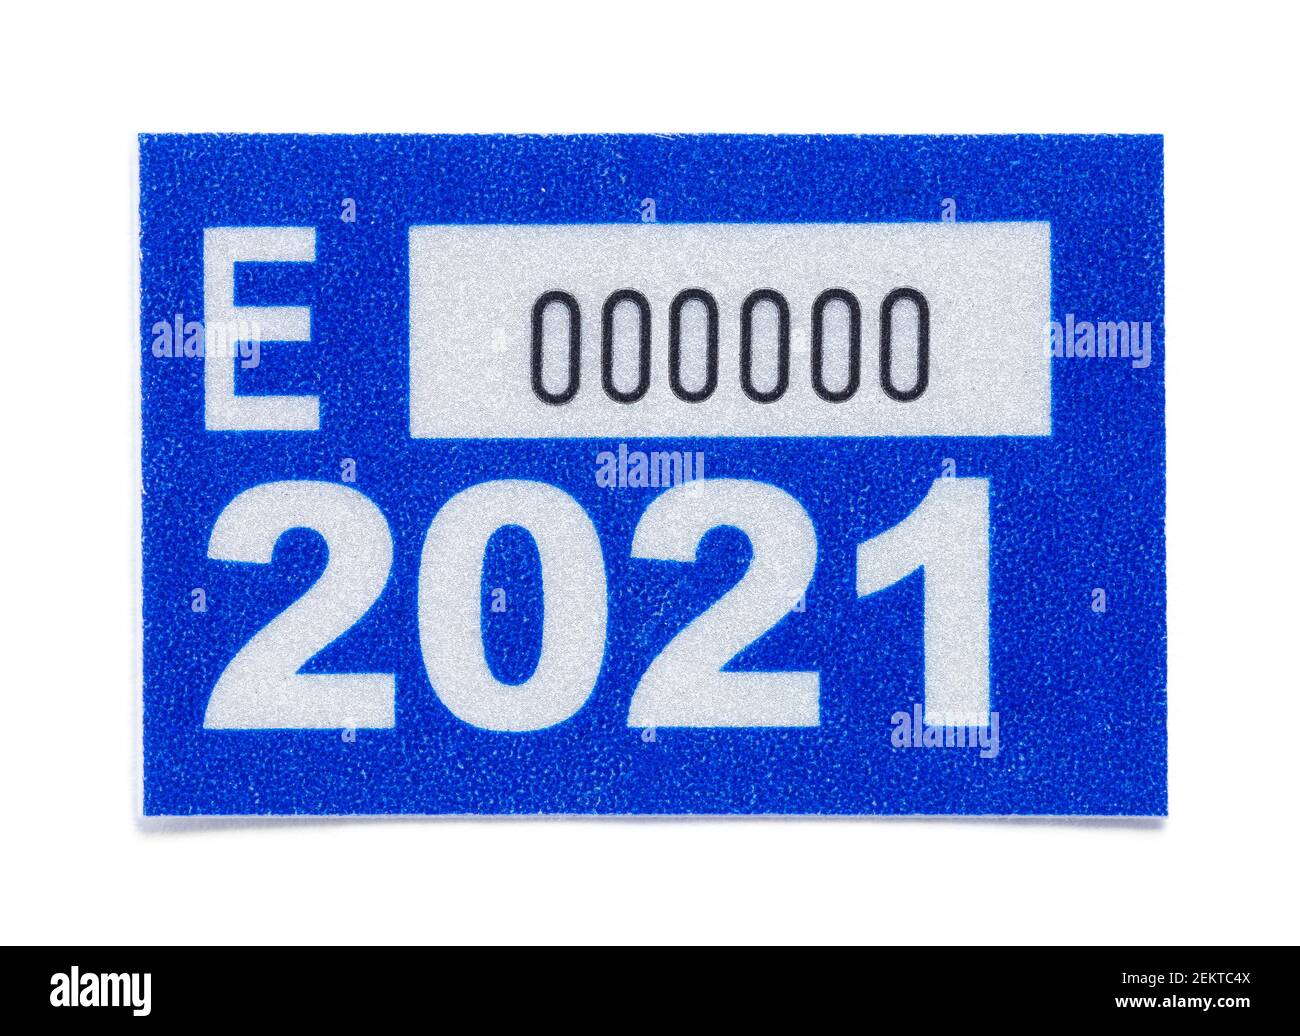 Blue Vehicle Registration Tag Sticker for License Plate Cut Out. Stock Photo